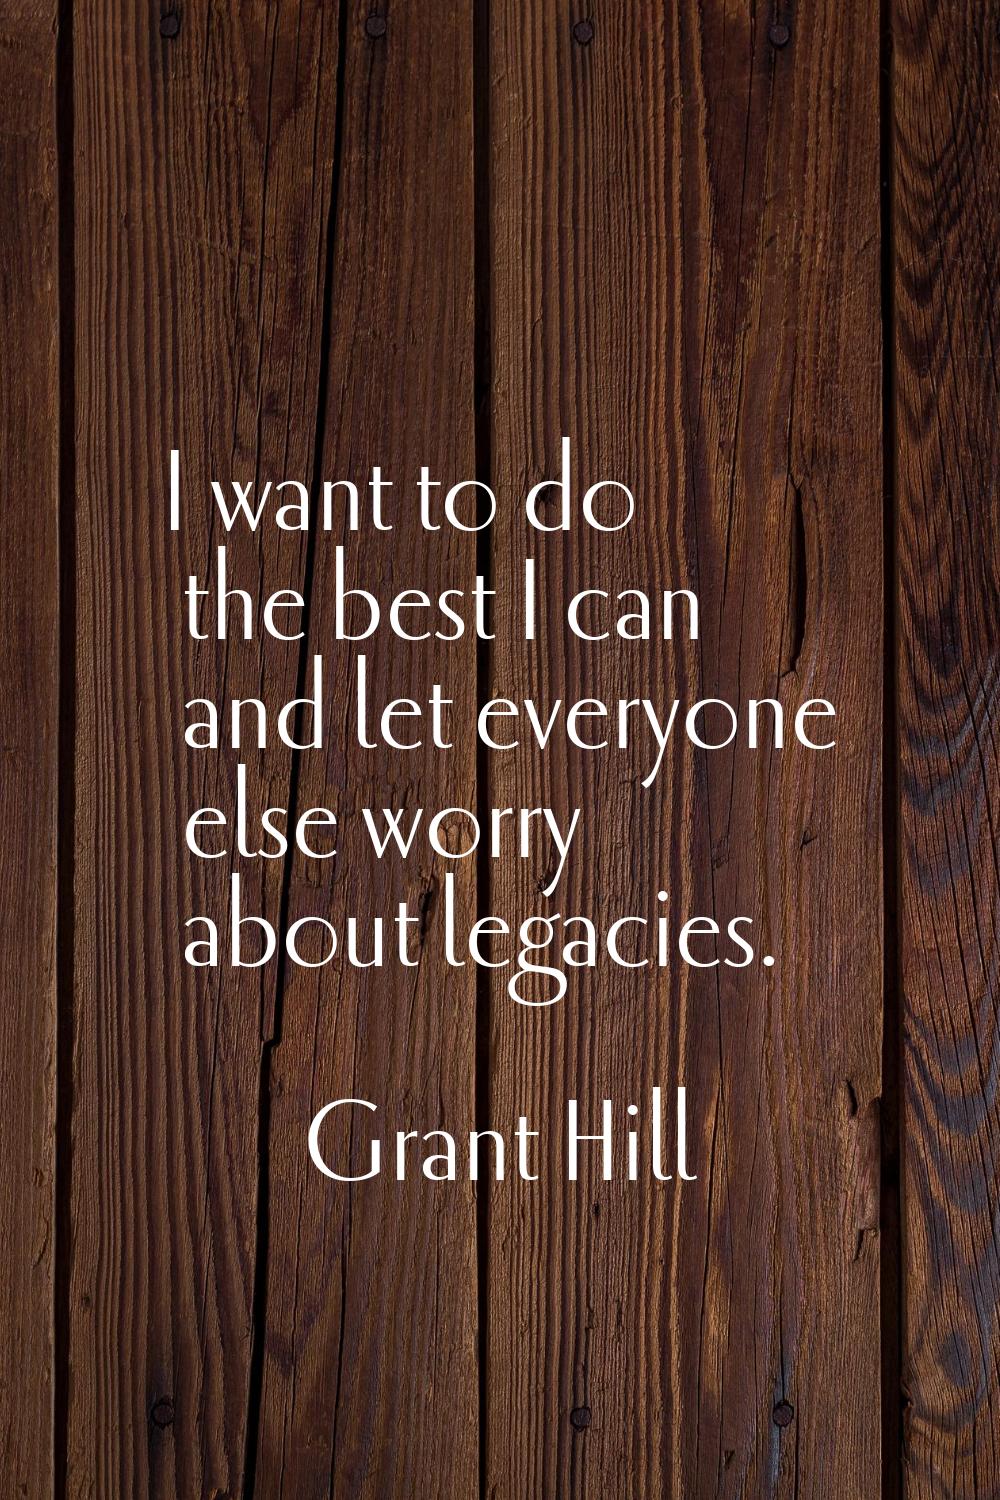 I want to do the best I can and let everyone else worry about legacies.